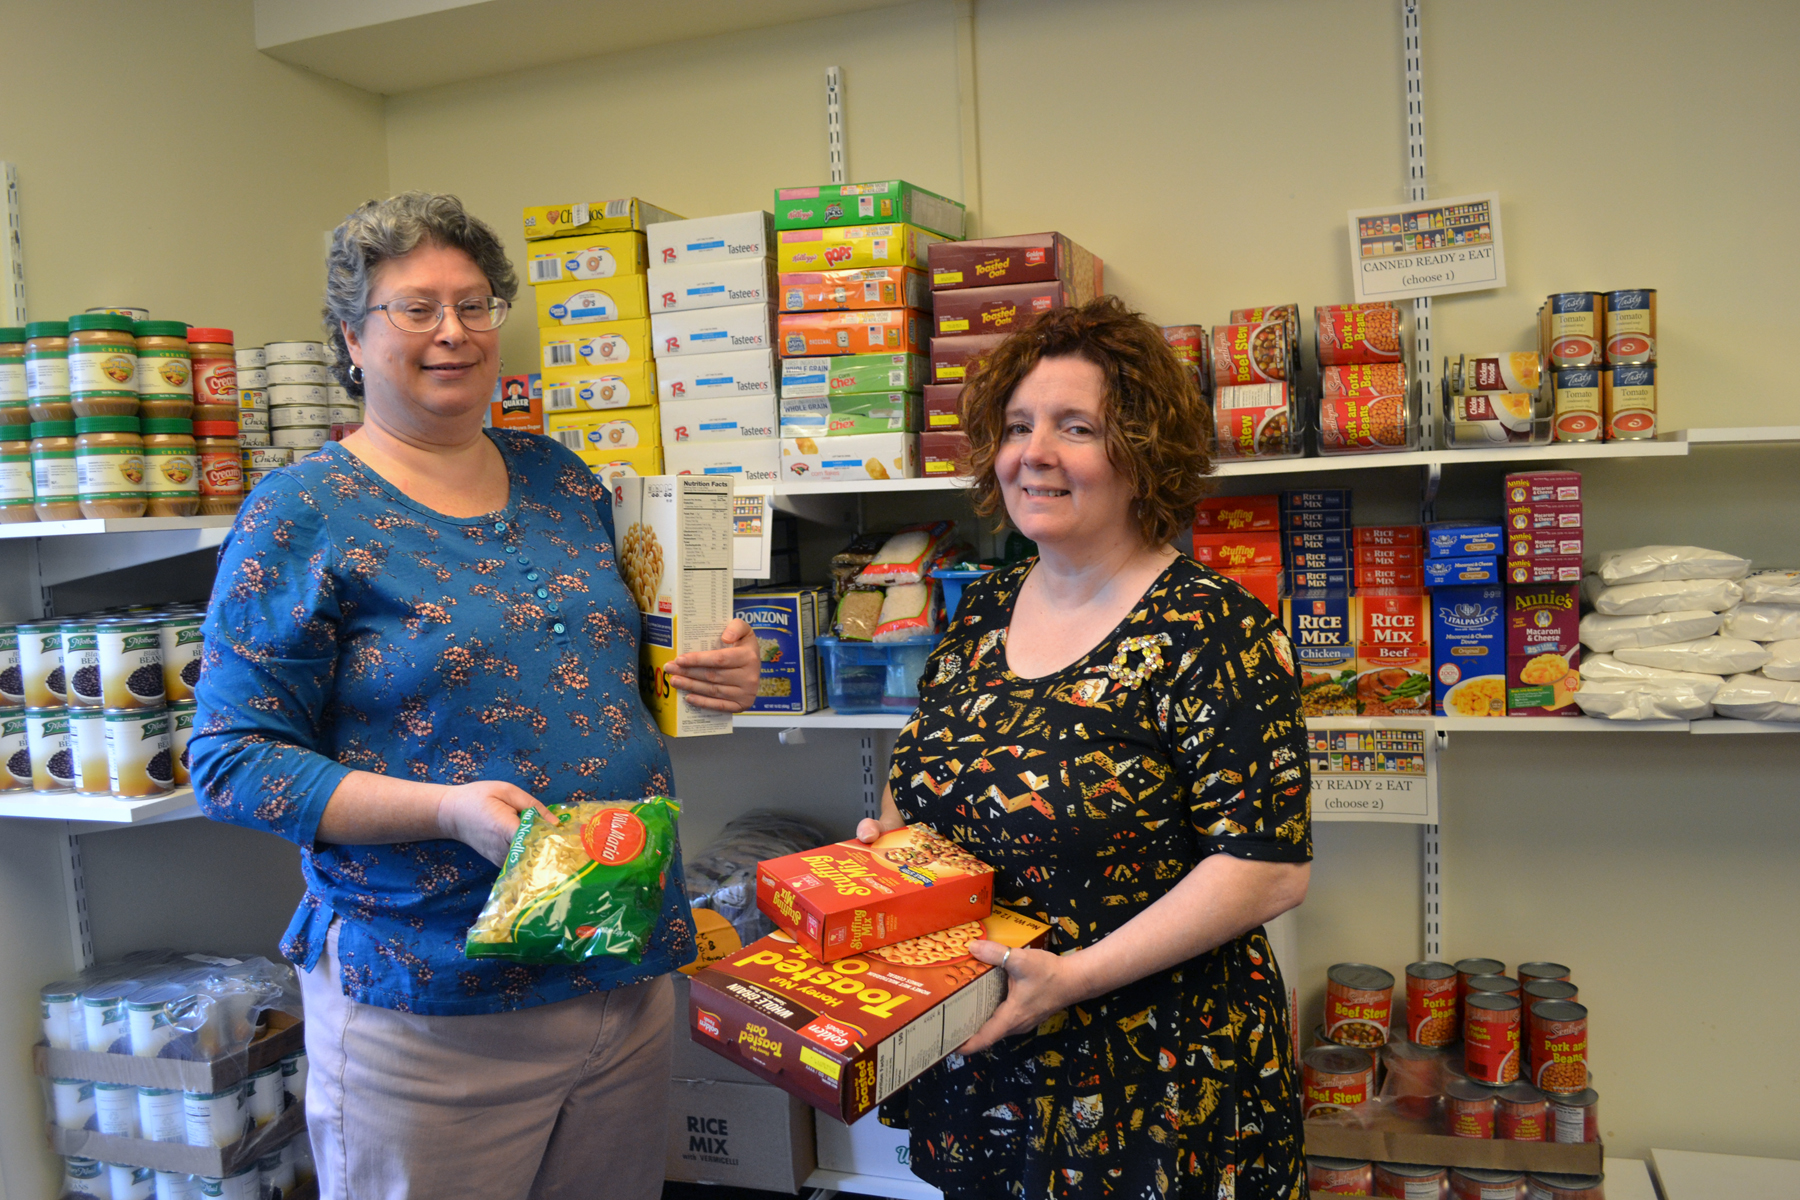 SUNY Schenectady Students Benefit from Access to Food Pantry on Campus